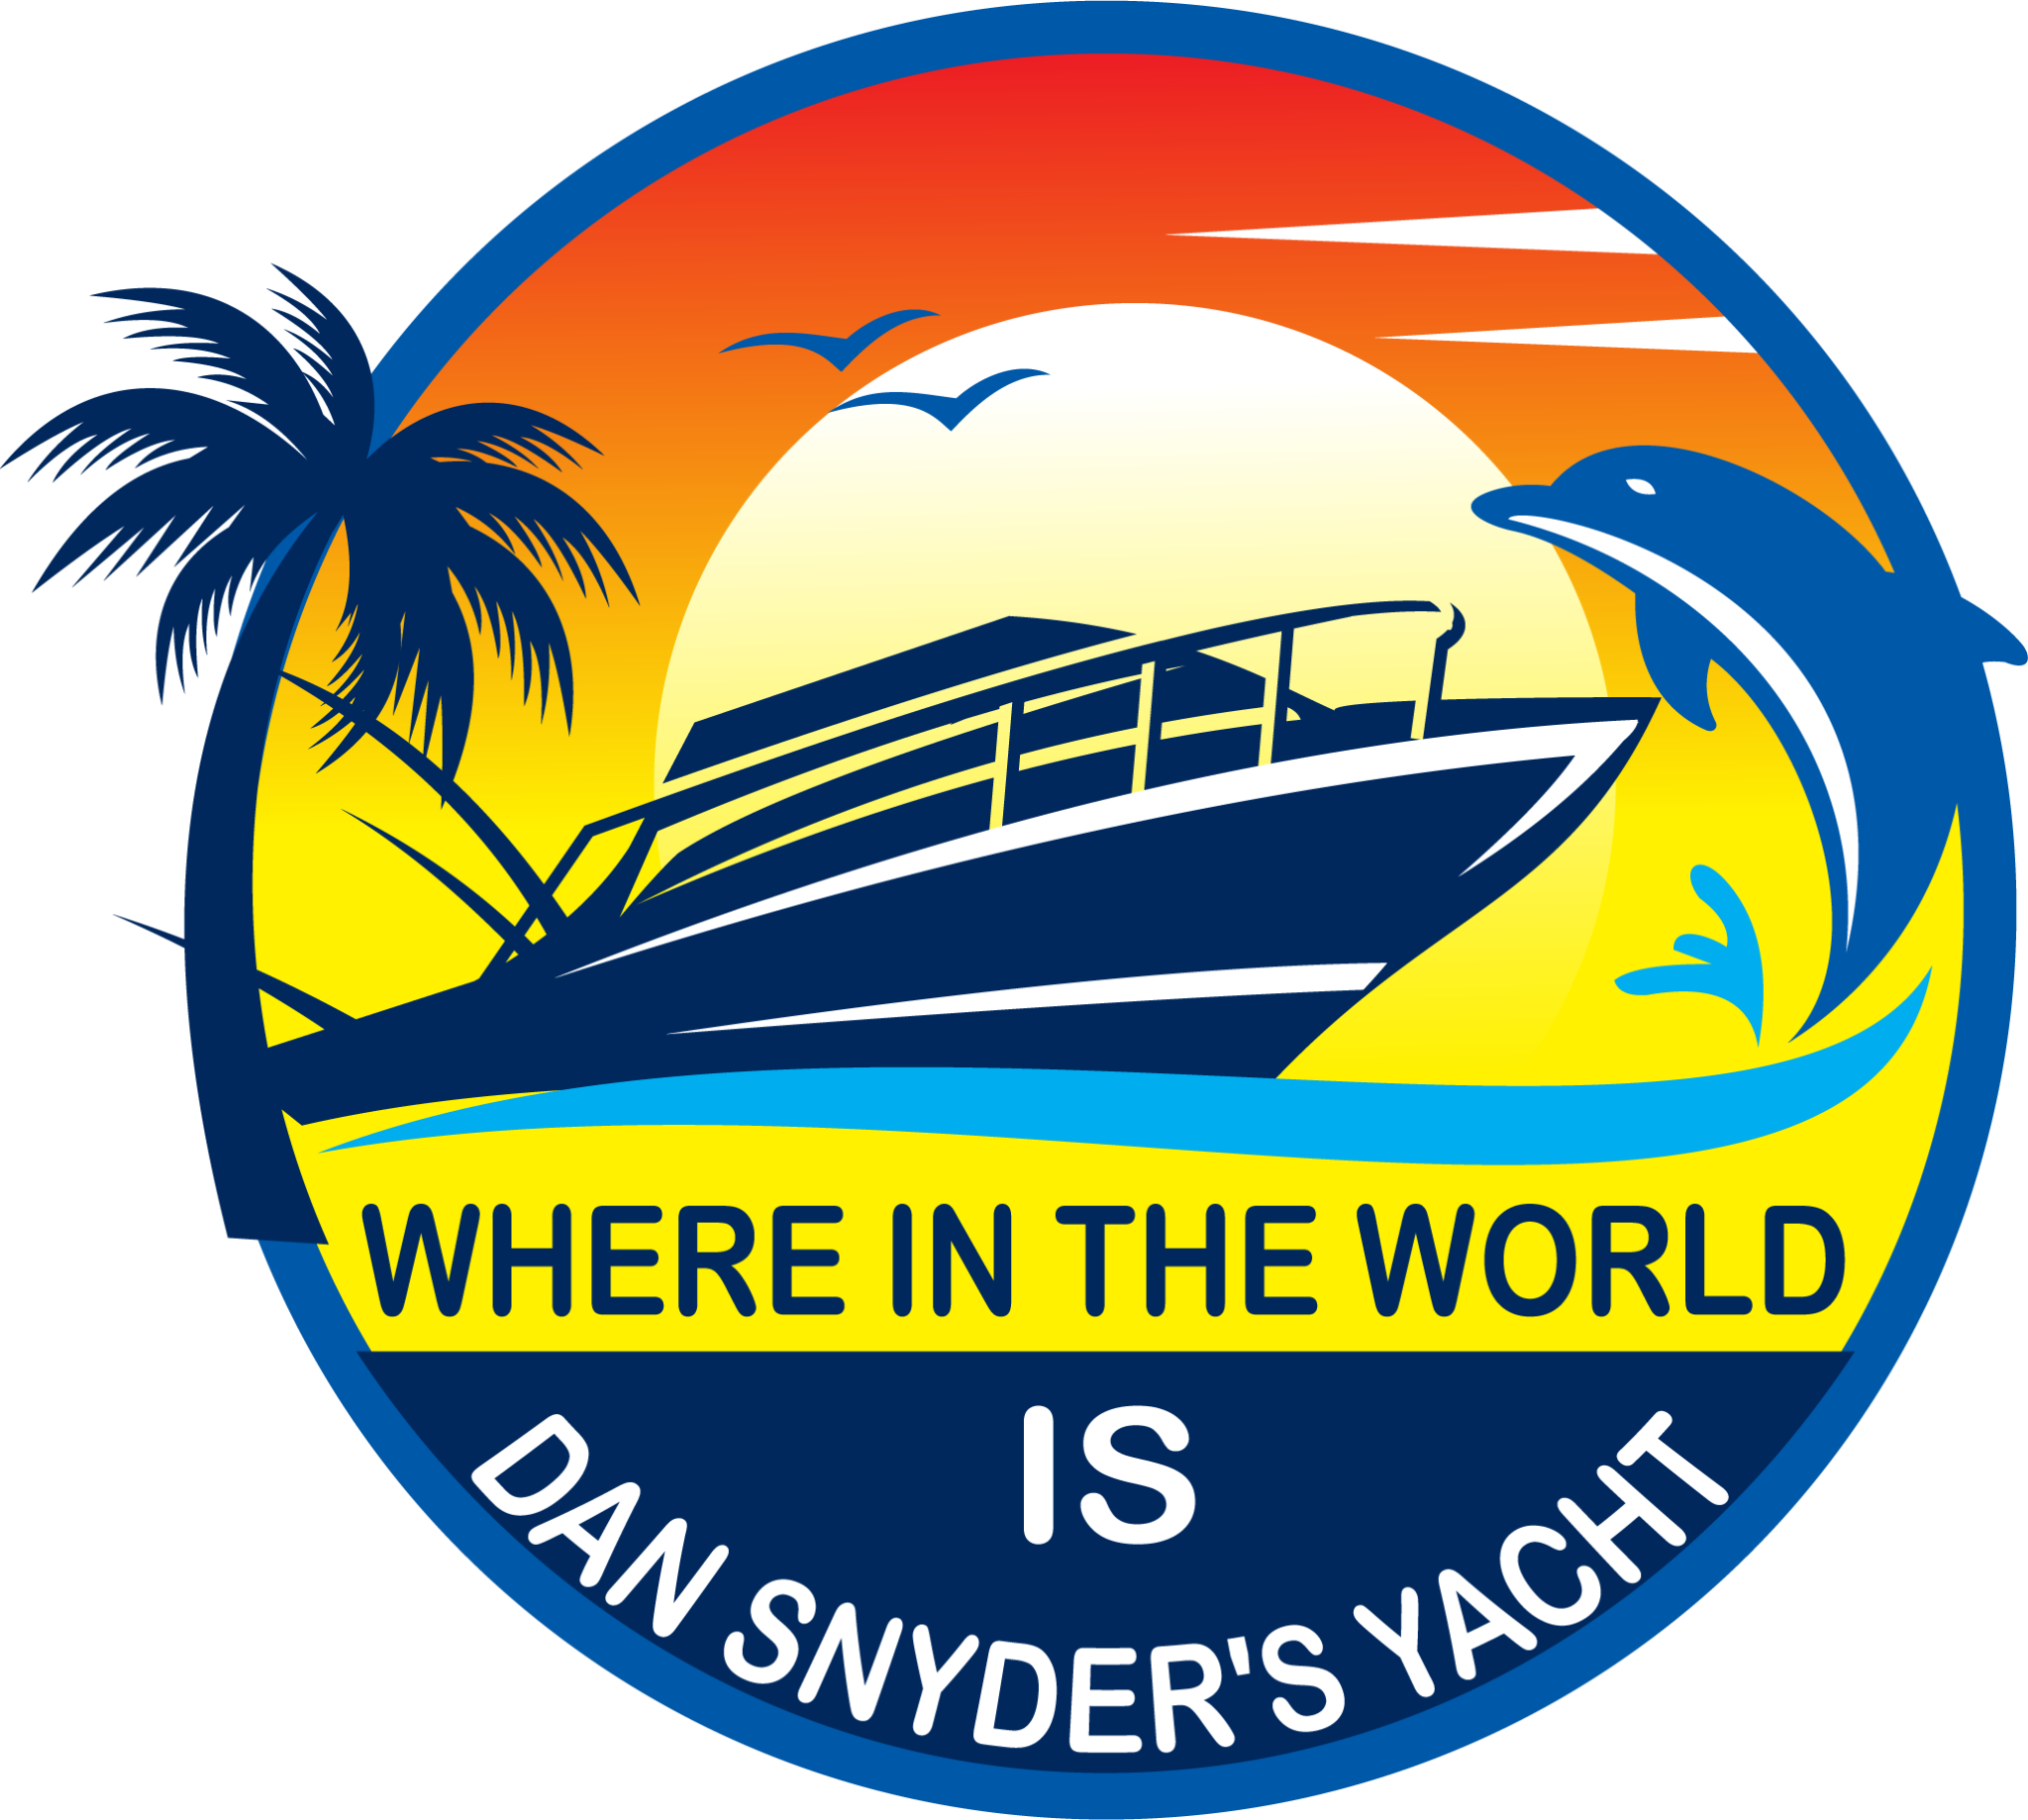 Where Is Dan Snyder's Yacht? An Interview With The Football Fan